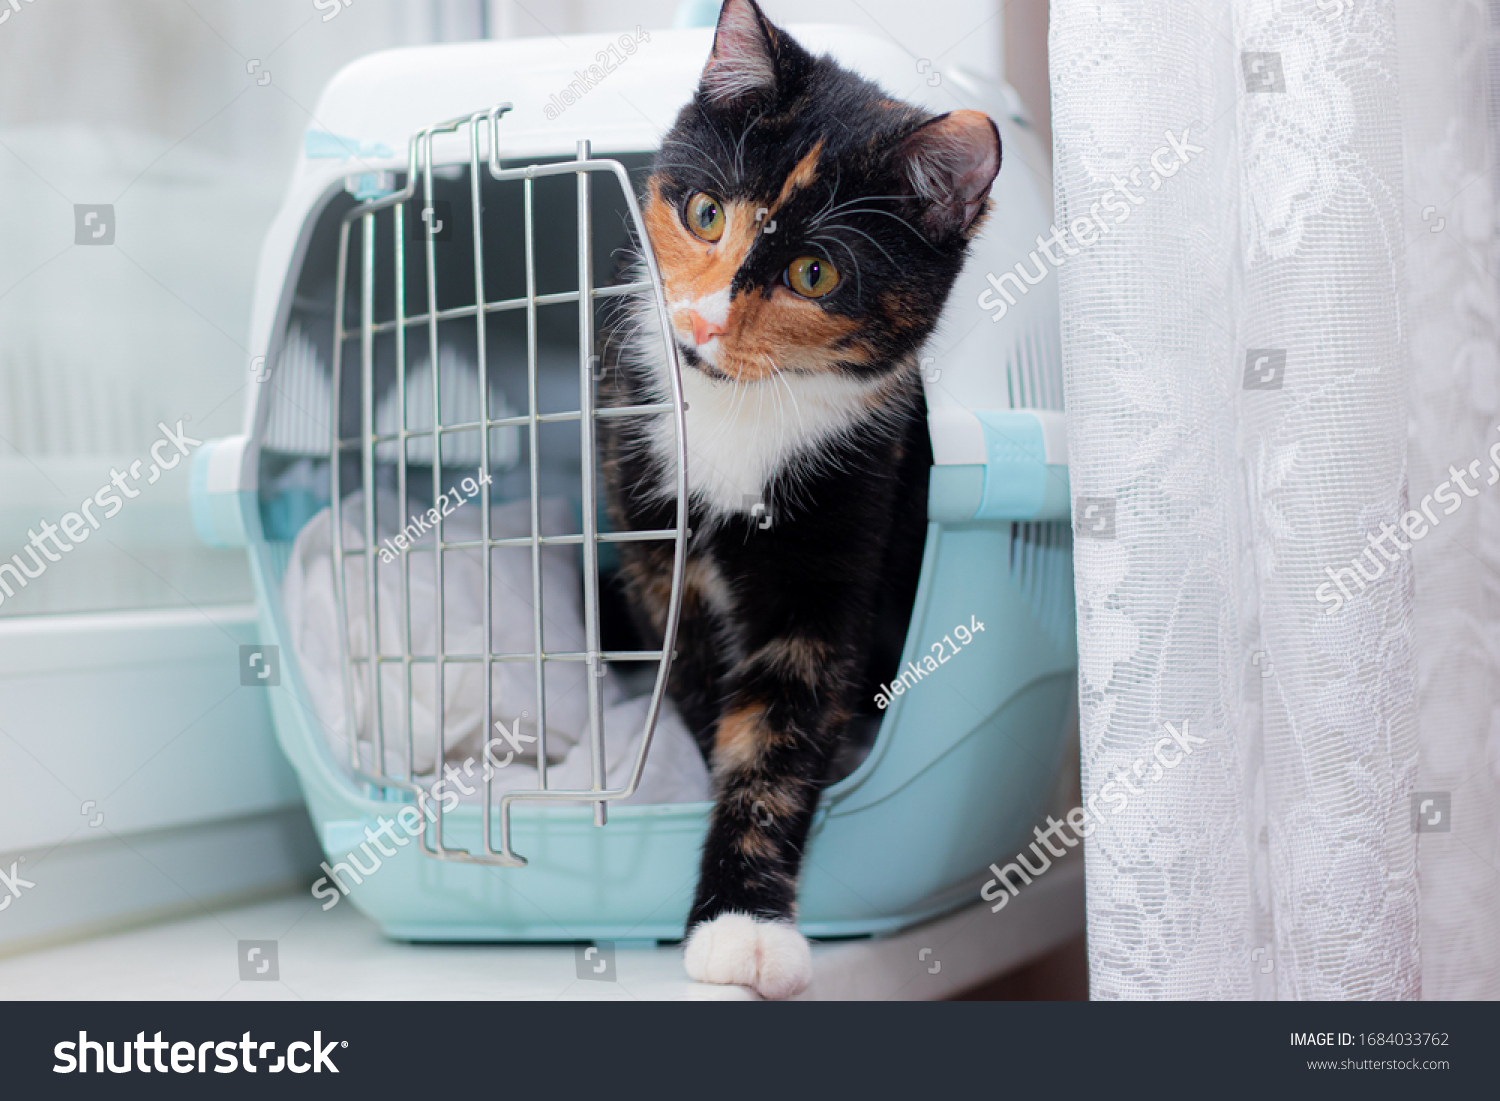 The cat sits in a carrier for animals .Transportation of animals. Article about animal transportation. Adult tortoiseshell cat. #1684033762